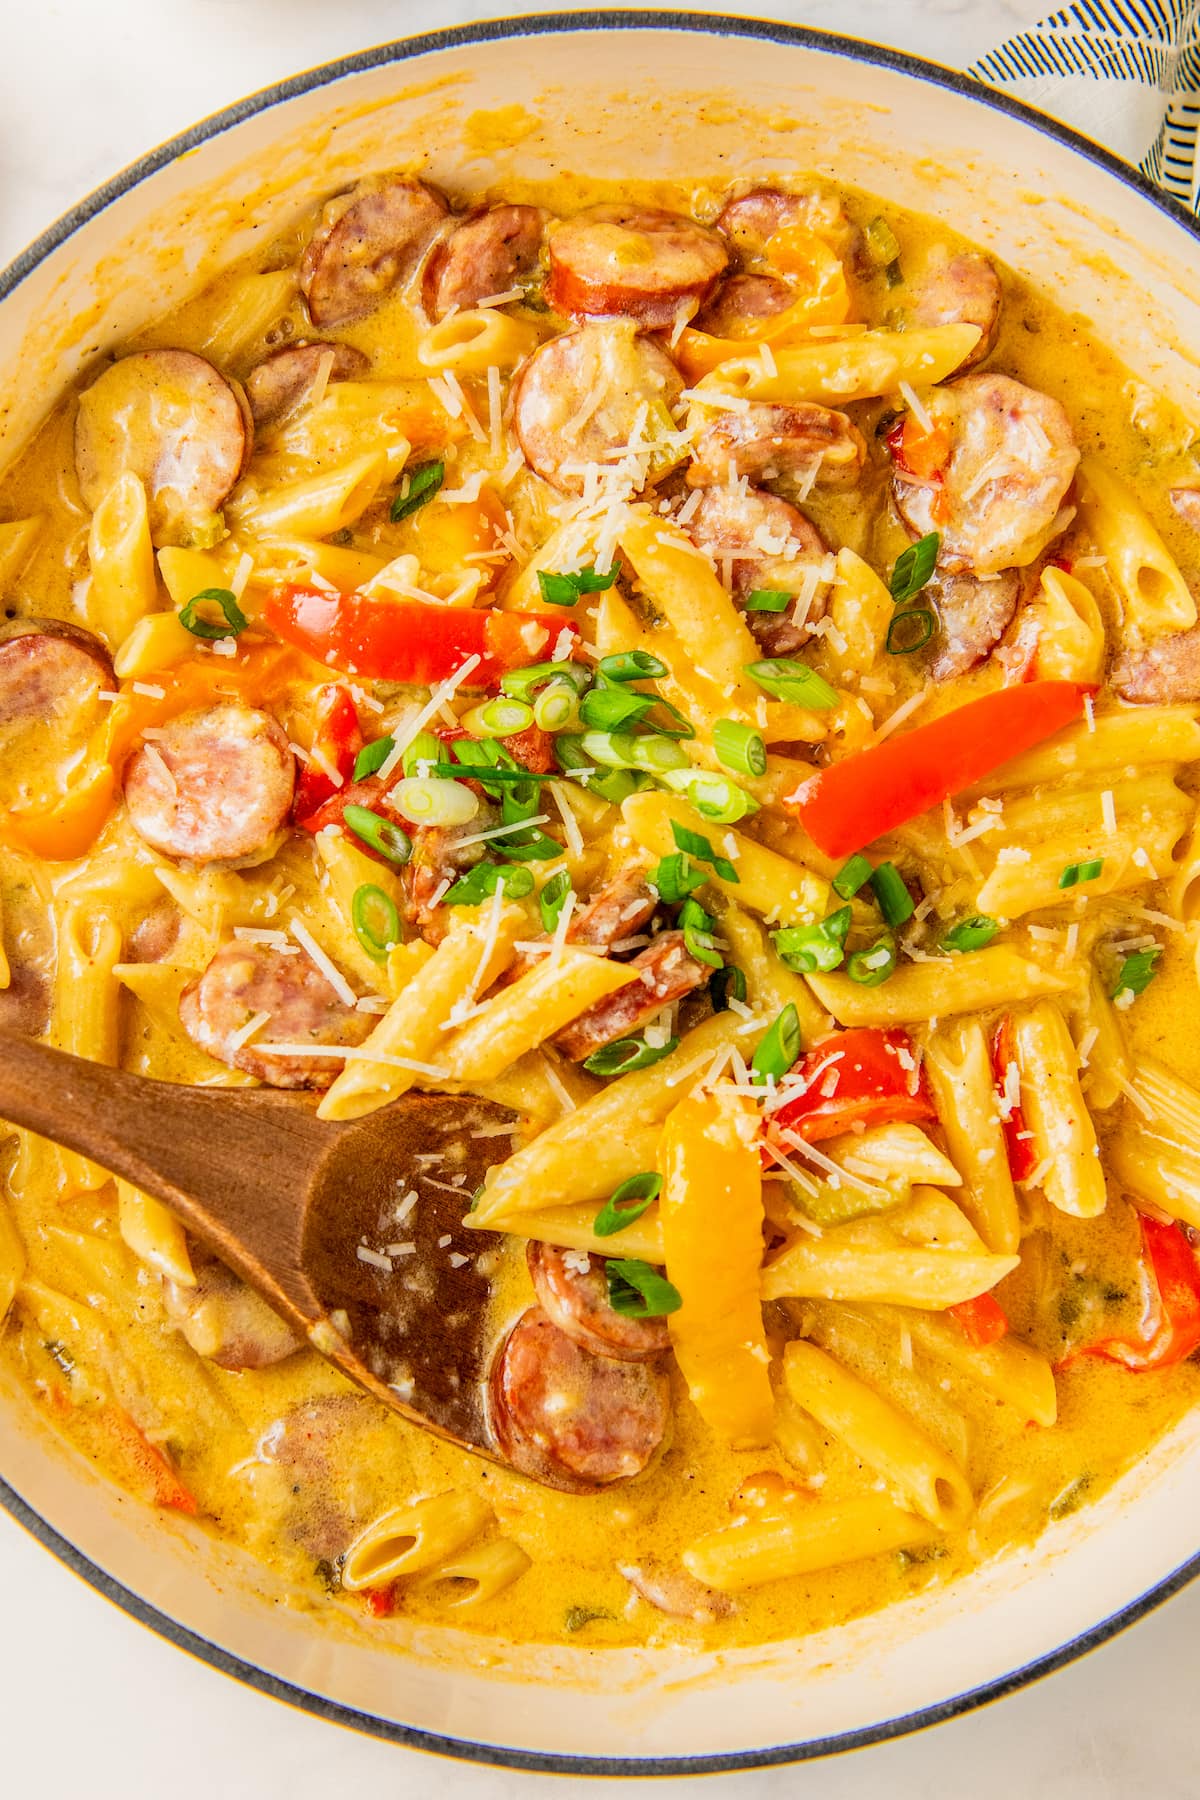 Creamy Cajun sausage pasta garnished with parmesan and green onions.